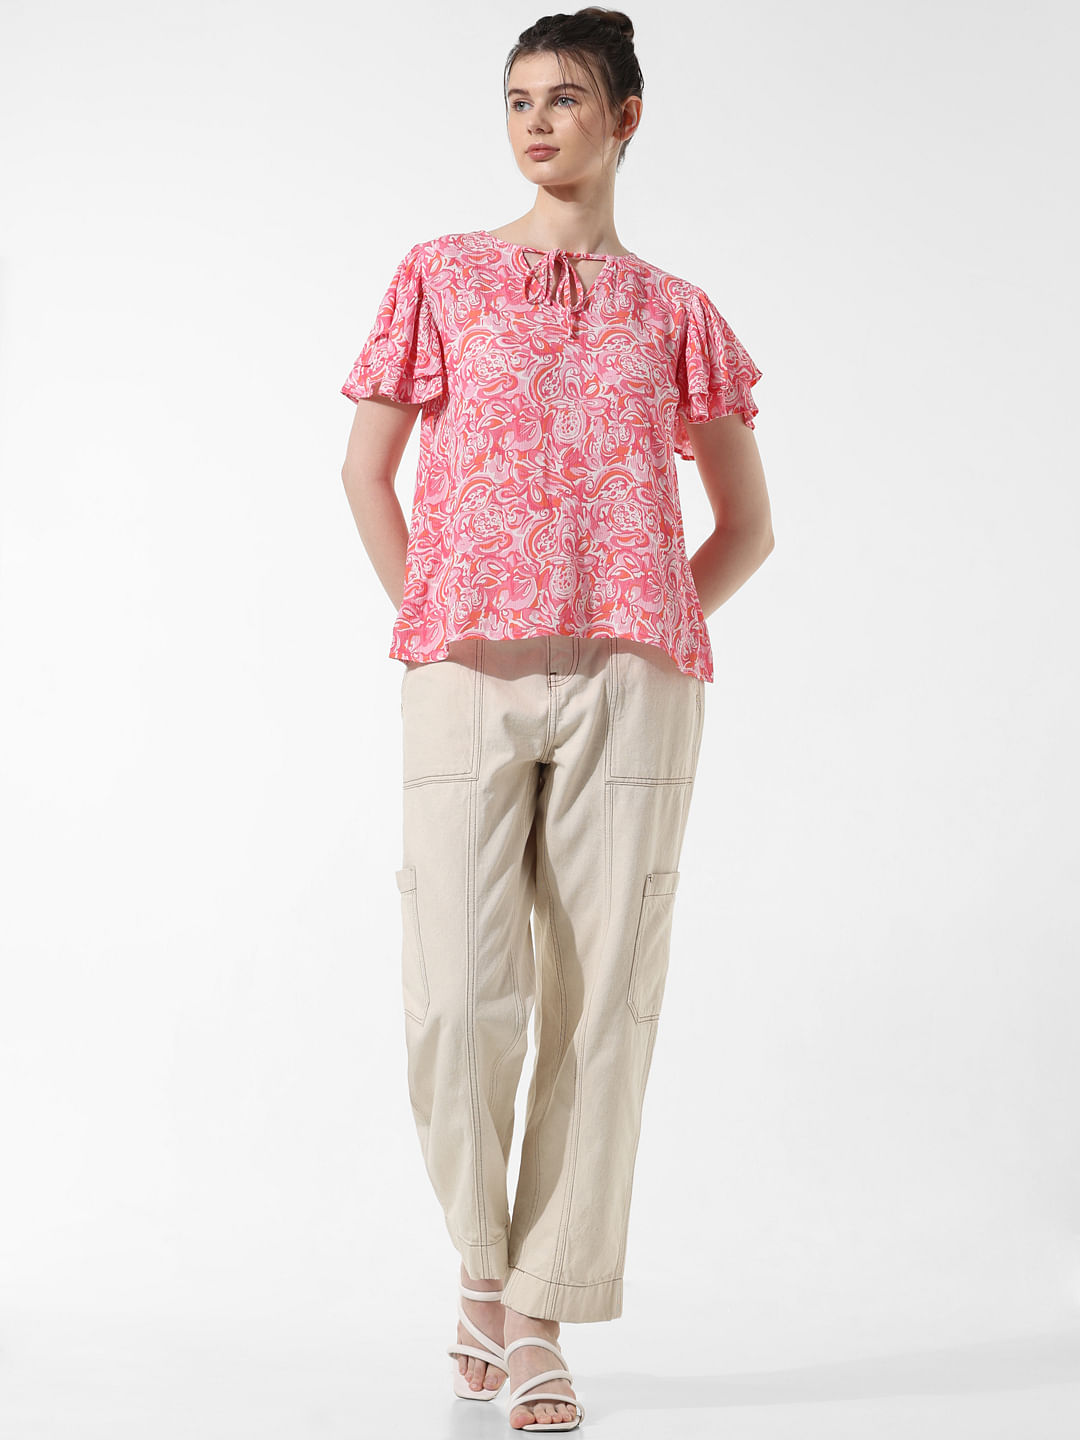 a woman wearing a pink shirt and black pants and white shoes Stock Photo by  Icons8